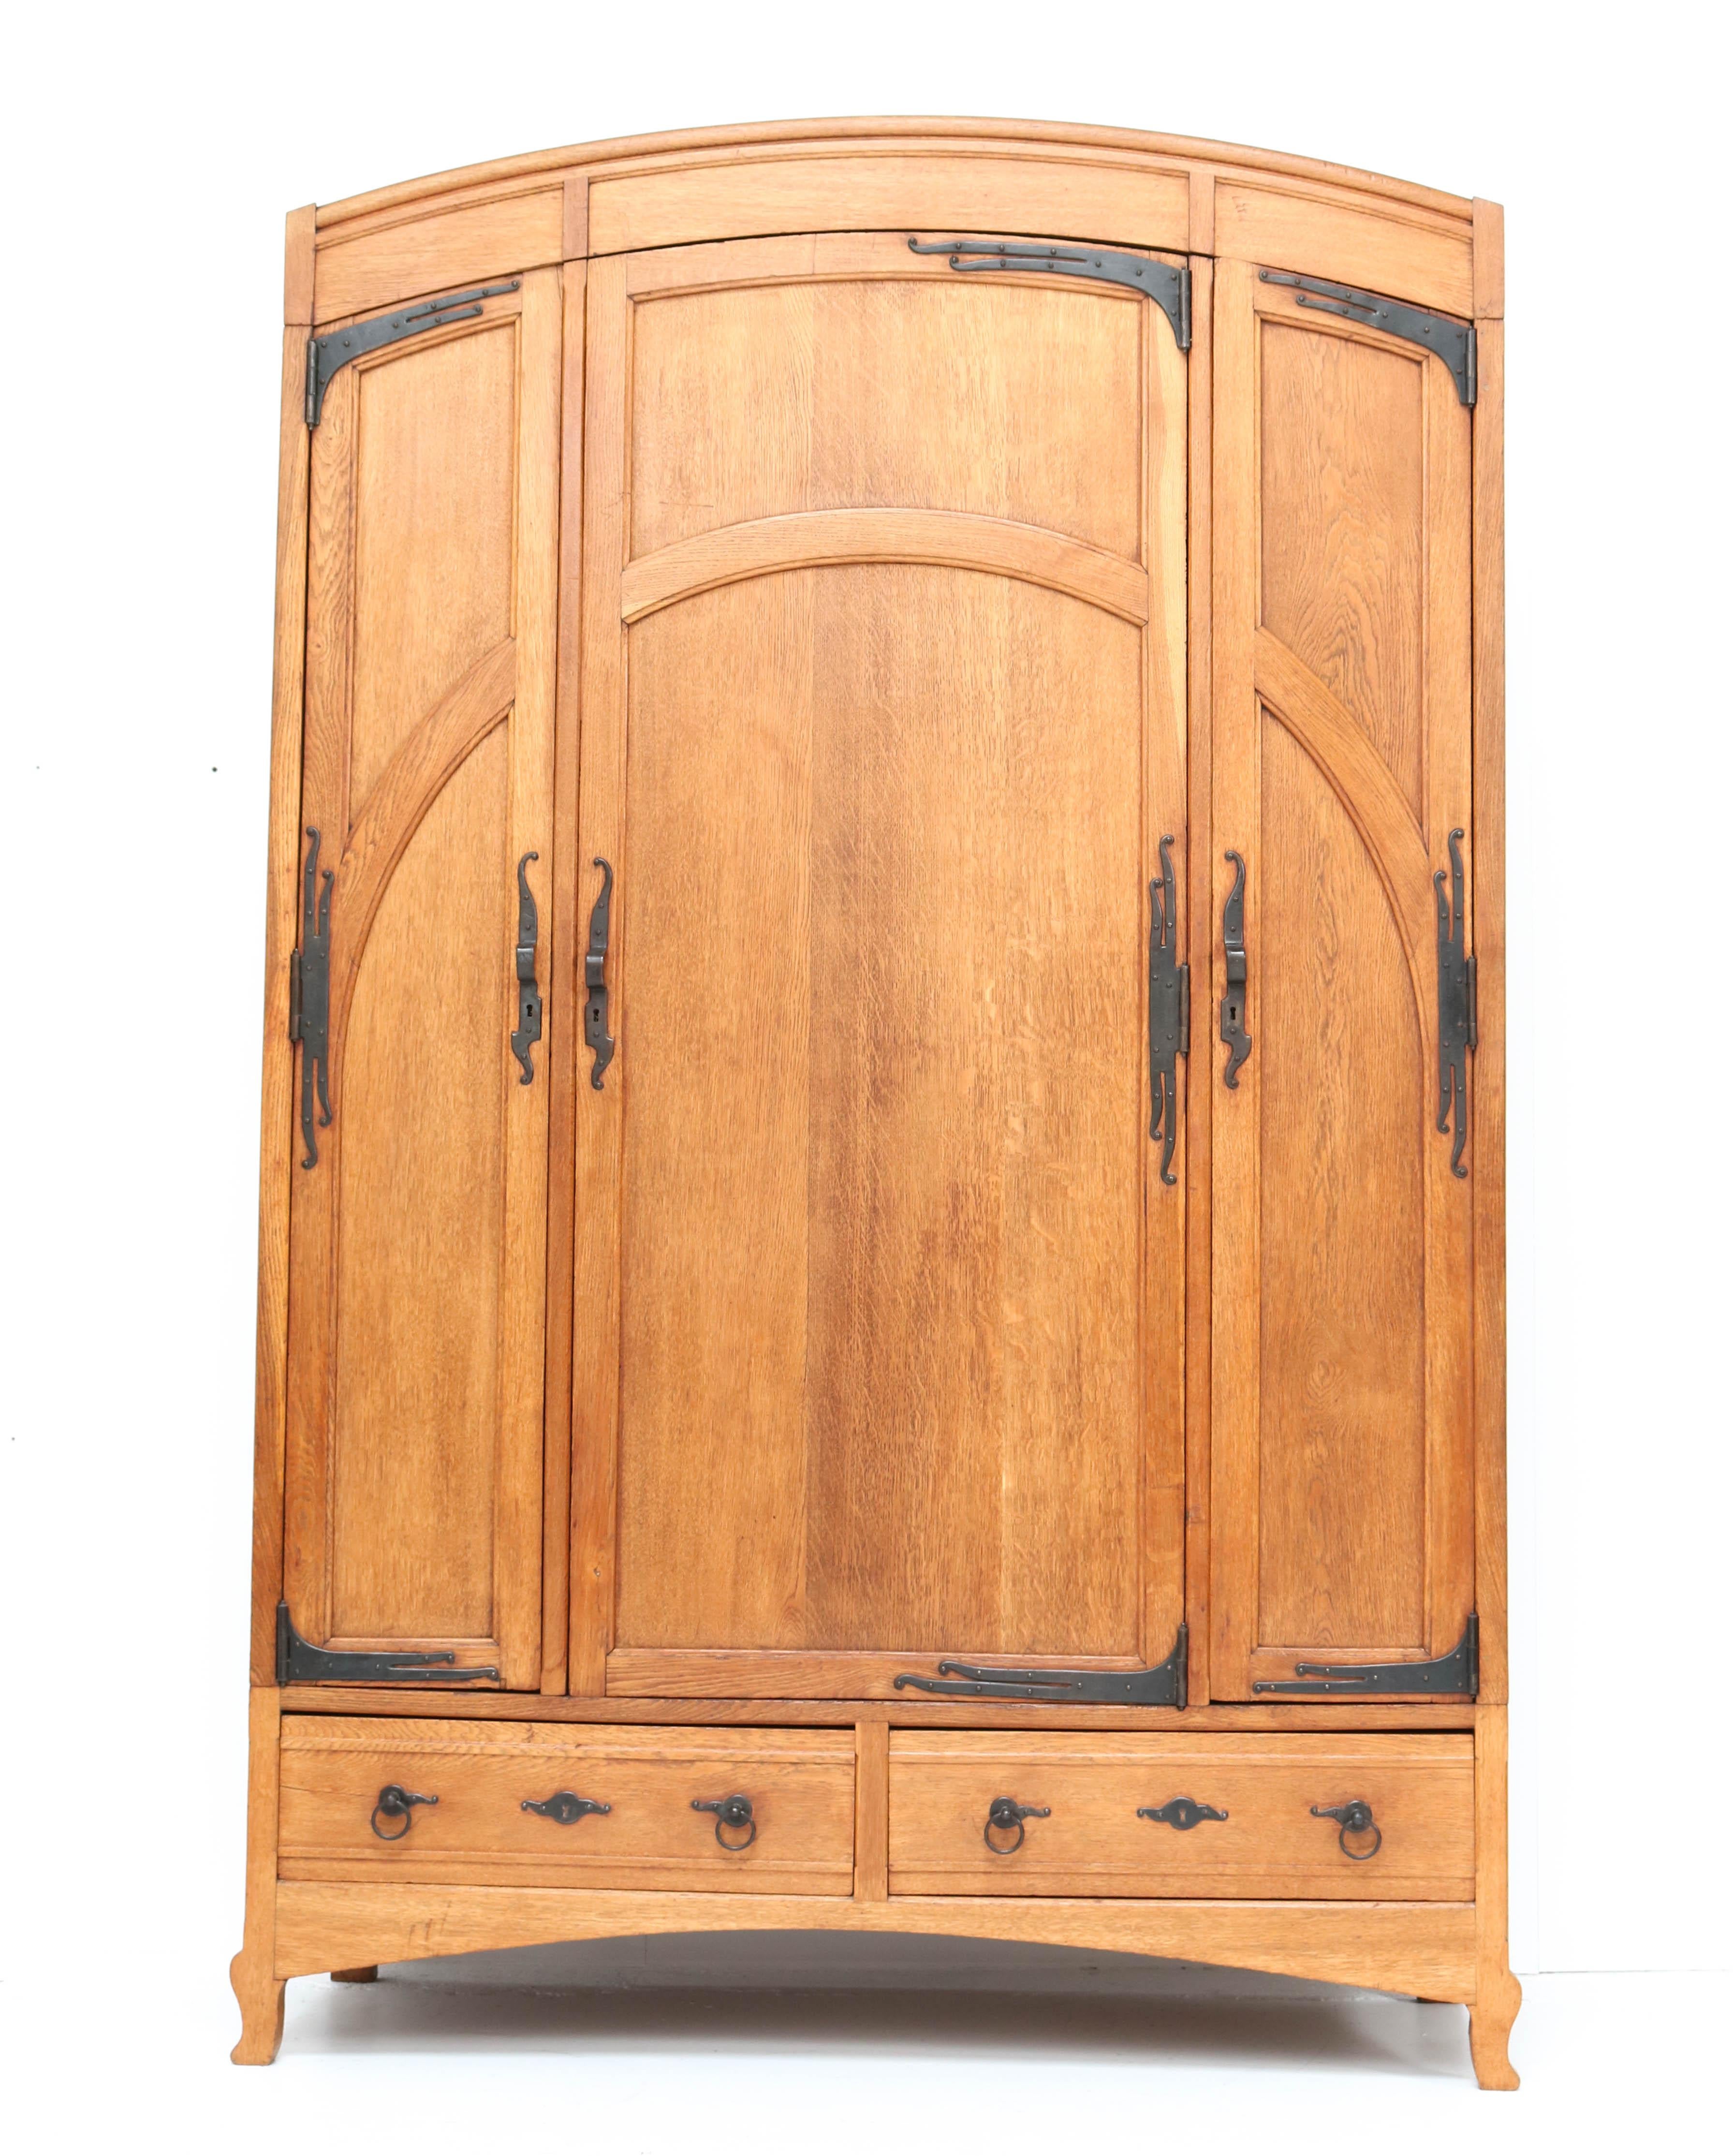 Magnificent and rare Art Nouveau Arts & Crafts armoire or wardrobe.
Design by Gustave Serrurier-Bovy.
Striking Belgium design from the 1900s.
Solid oak with black lacquered wrought iron.
This wonderful piece of furniture can be dismantled for